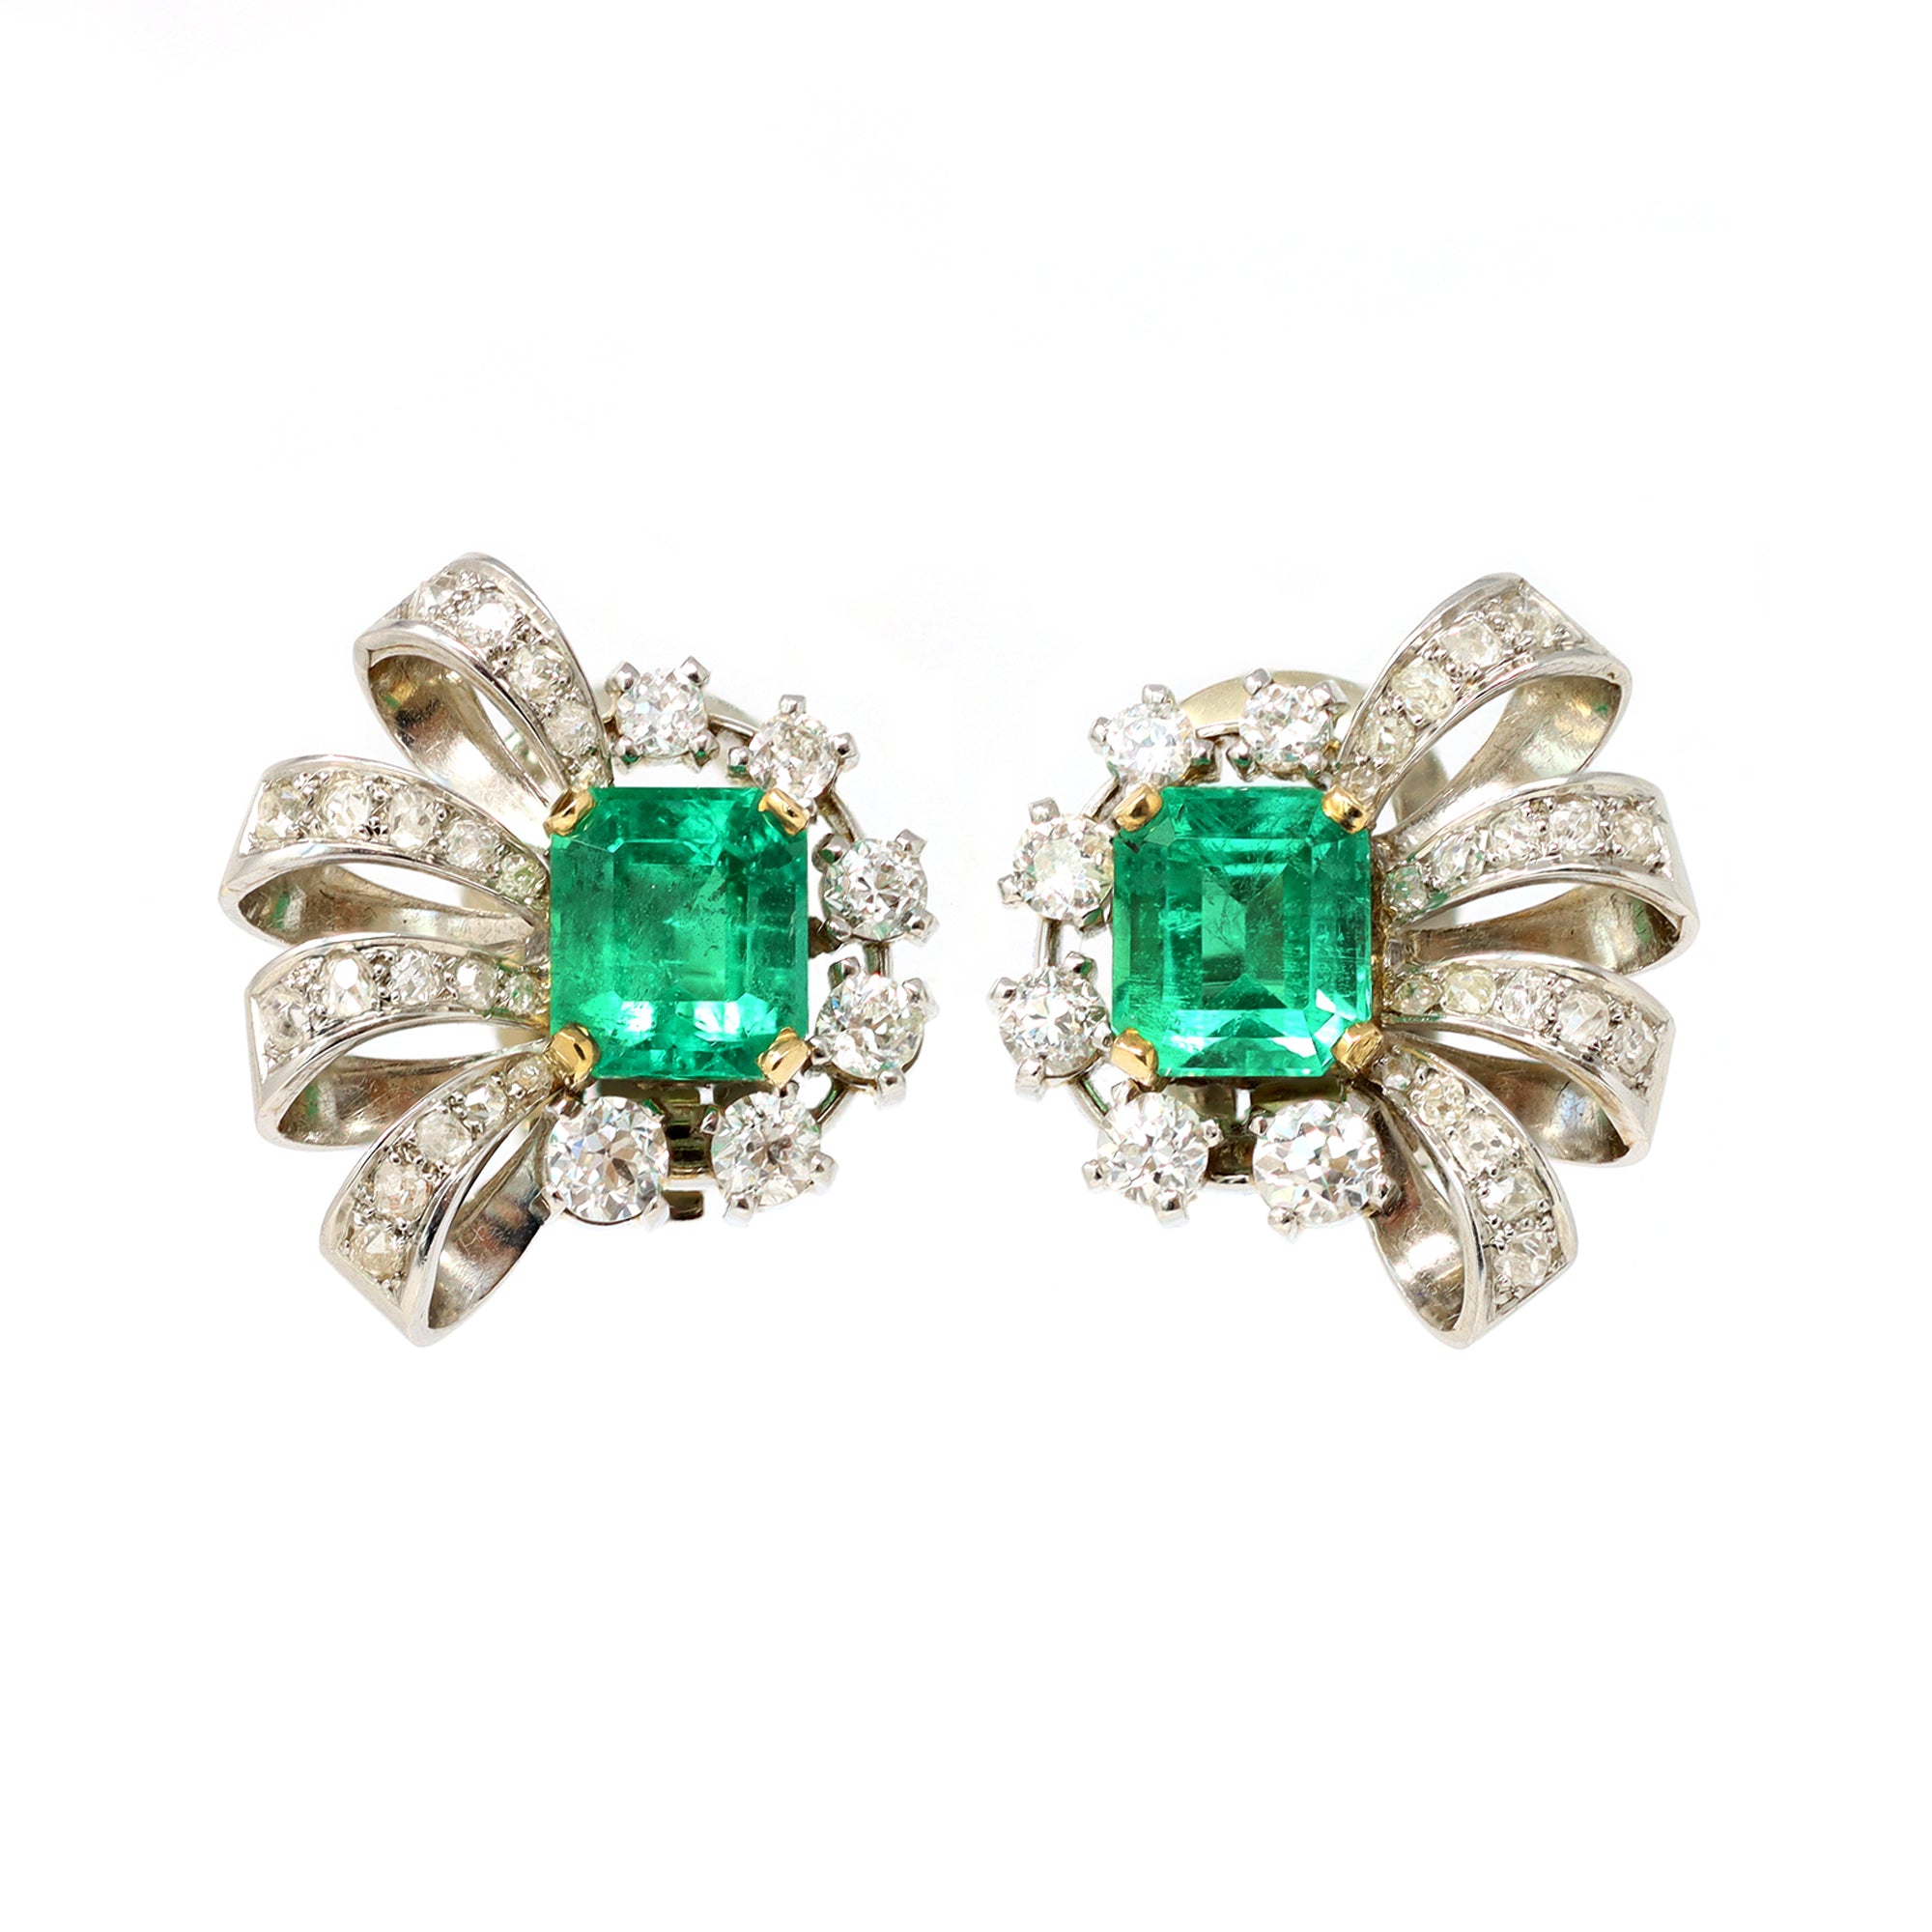 Pair of Emerald and Diamond Clip on Earrings in Platinum, Circa 1940 front view